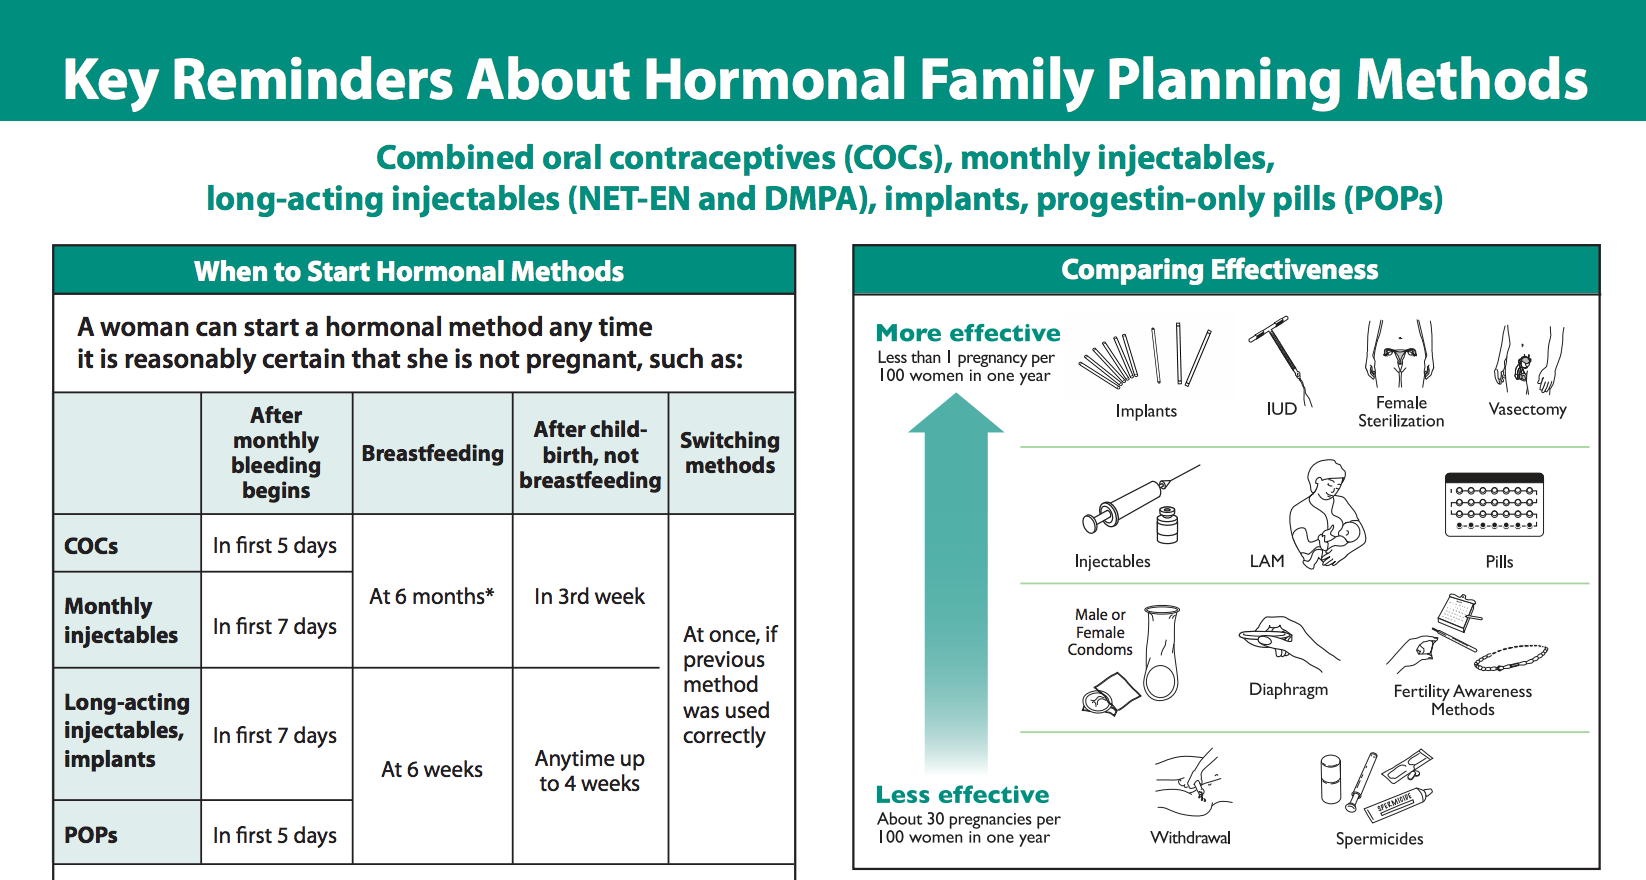 Key Reminders about Hormonal Family Planning Methods